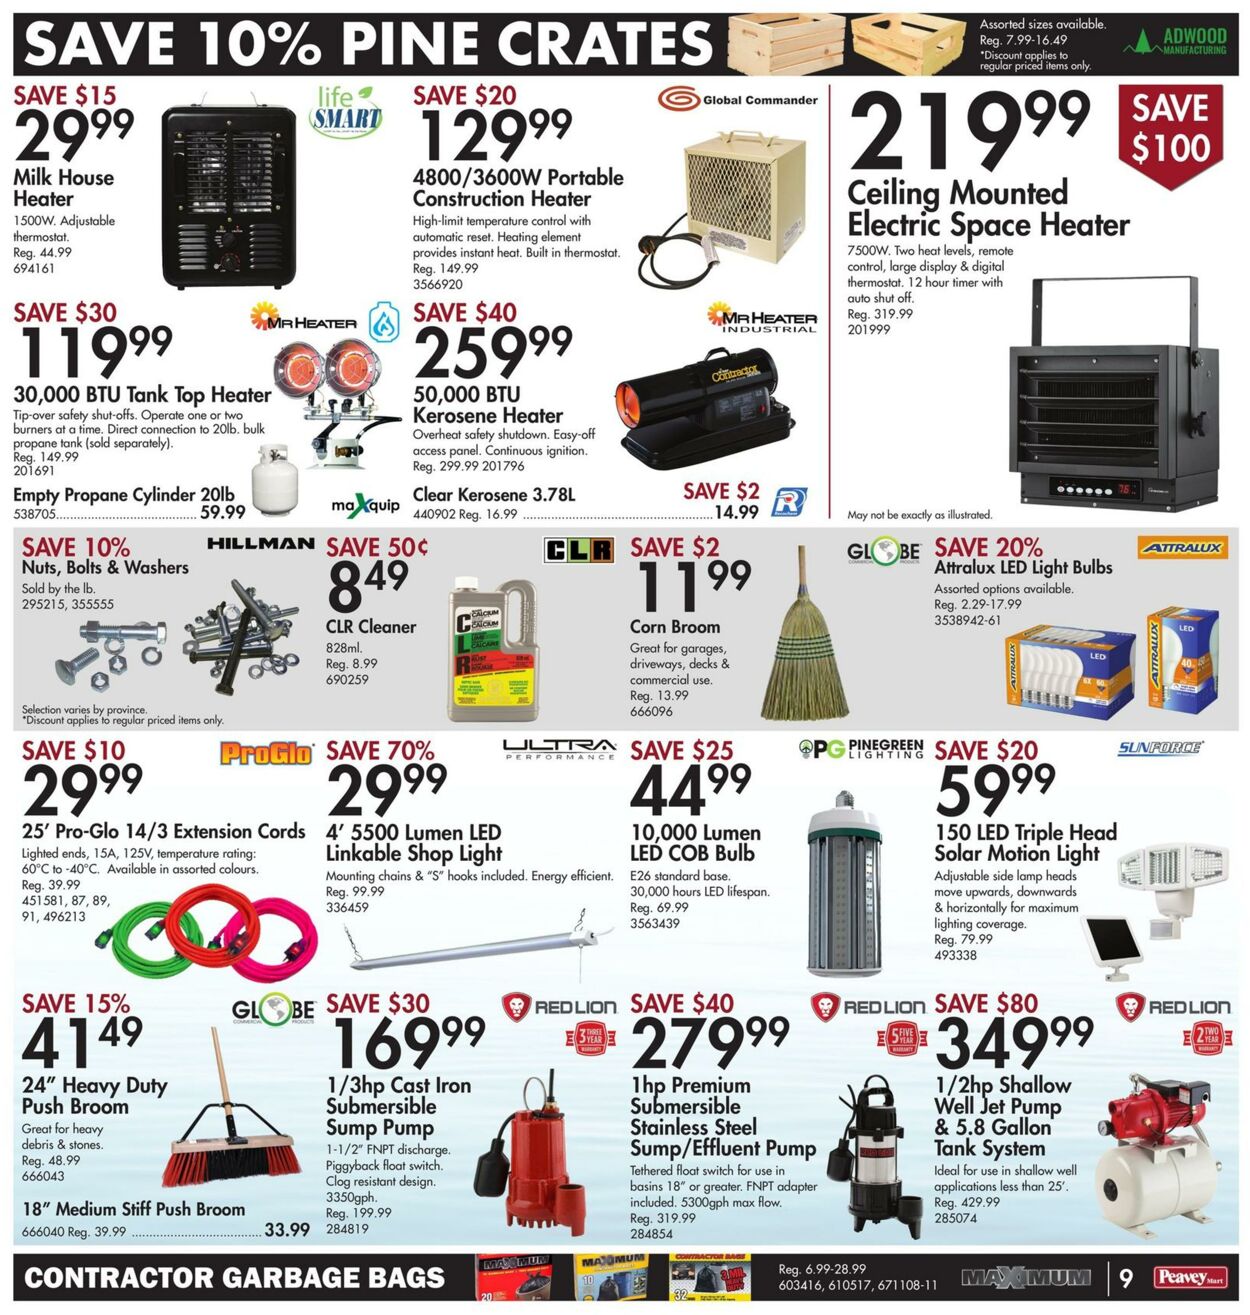 Peavey Mart Flyer from 11/03/2023